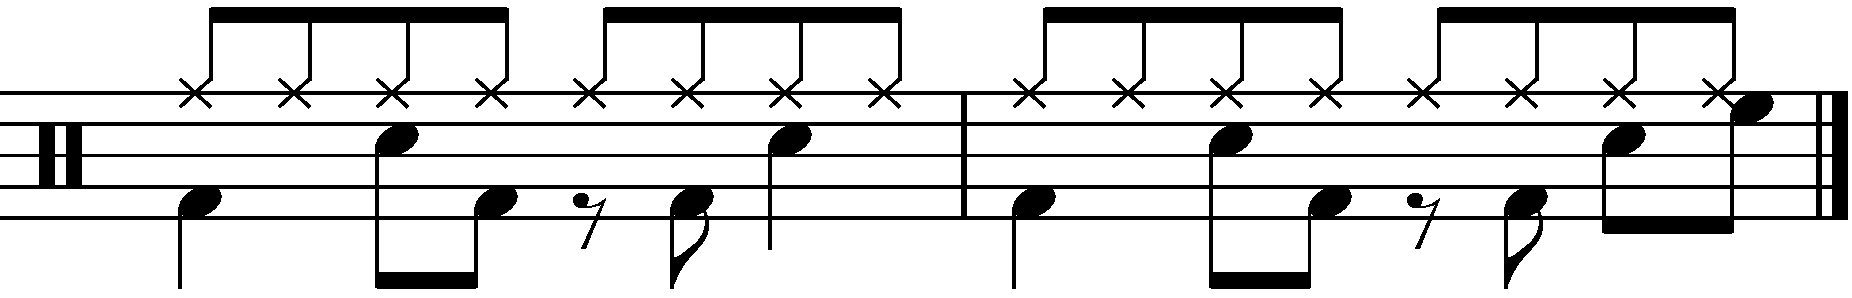 2 Bar Grooves - Example 3e